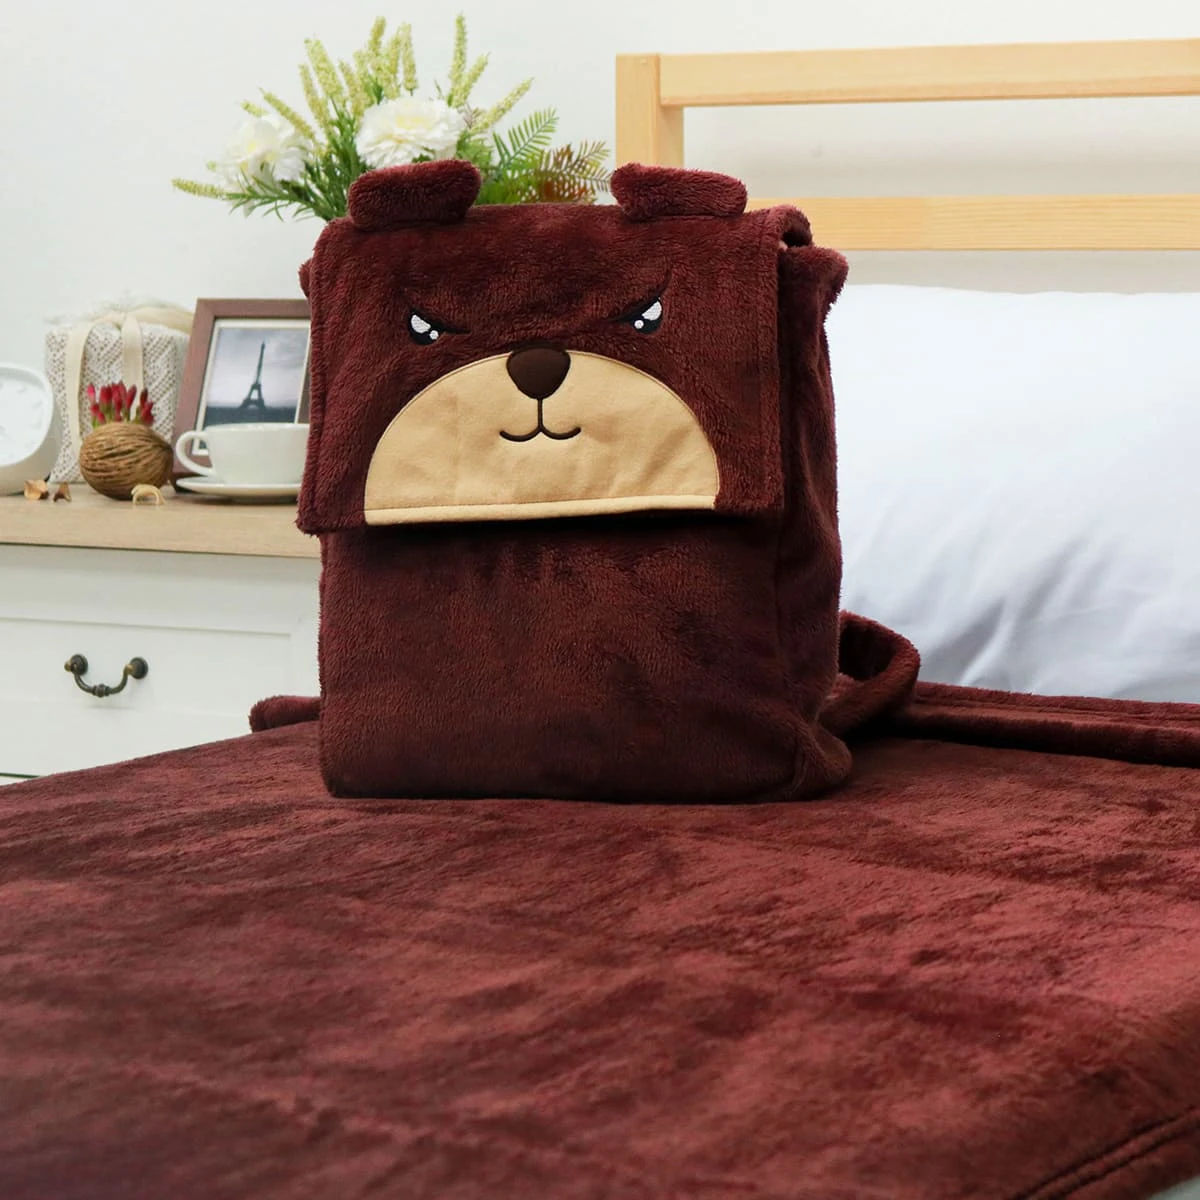 Ton 3D Embroidery Backpack with Plush Blanket (Red Brown)